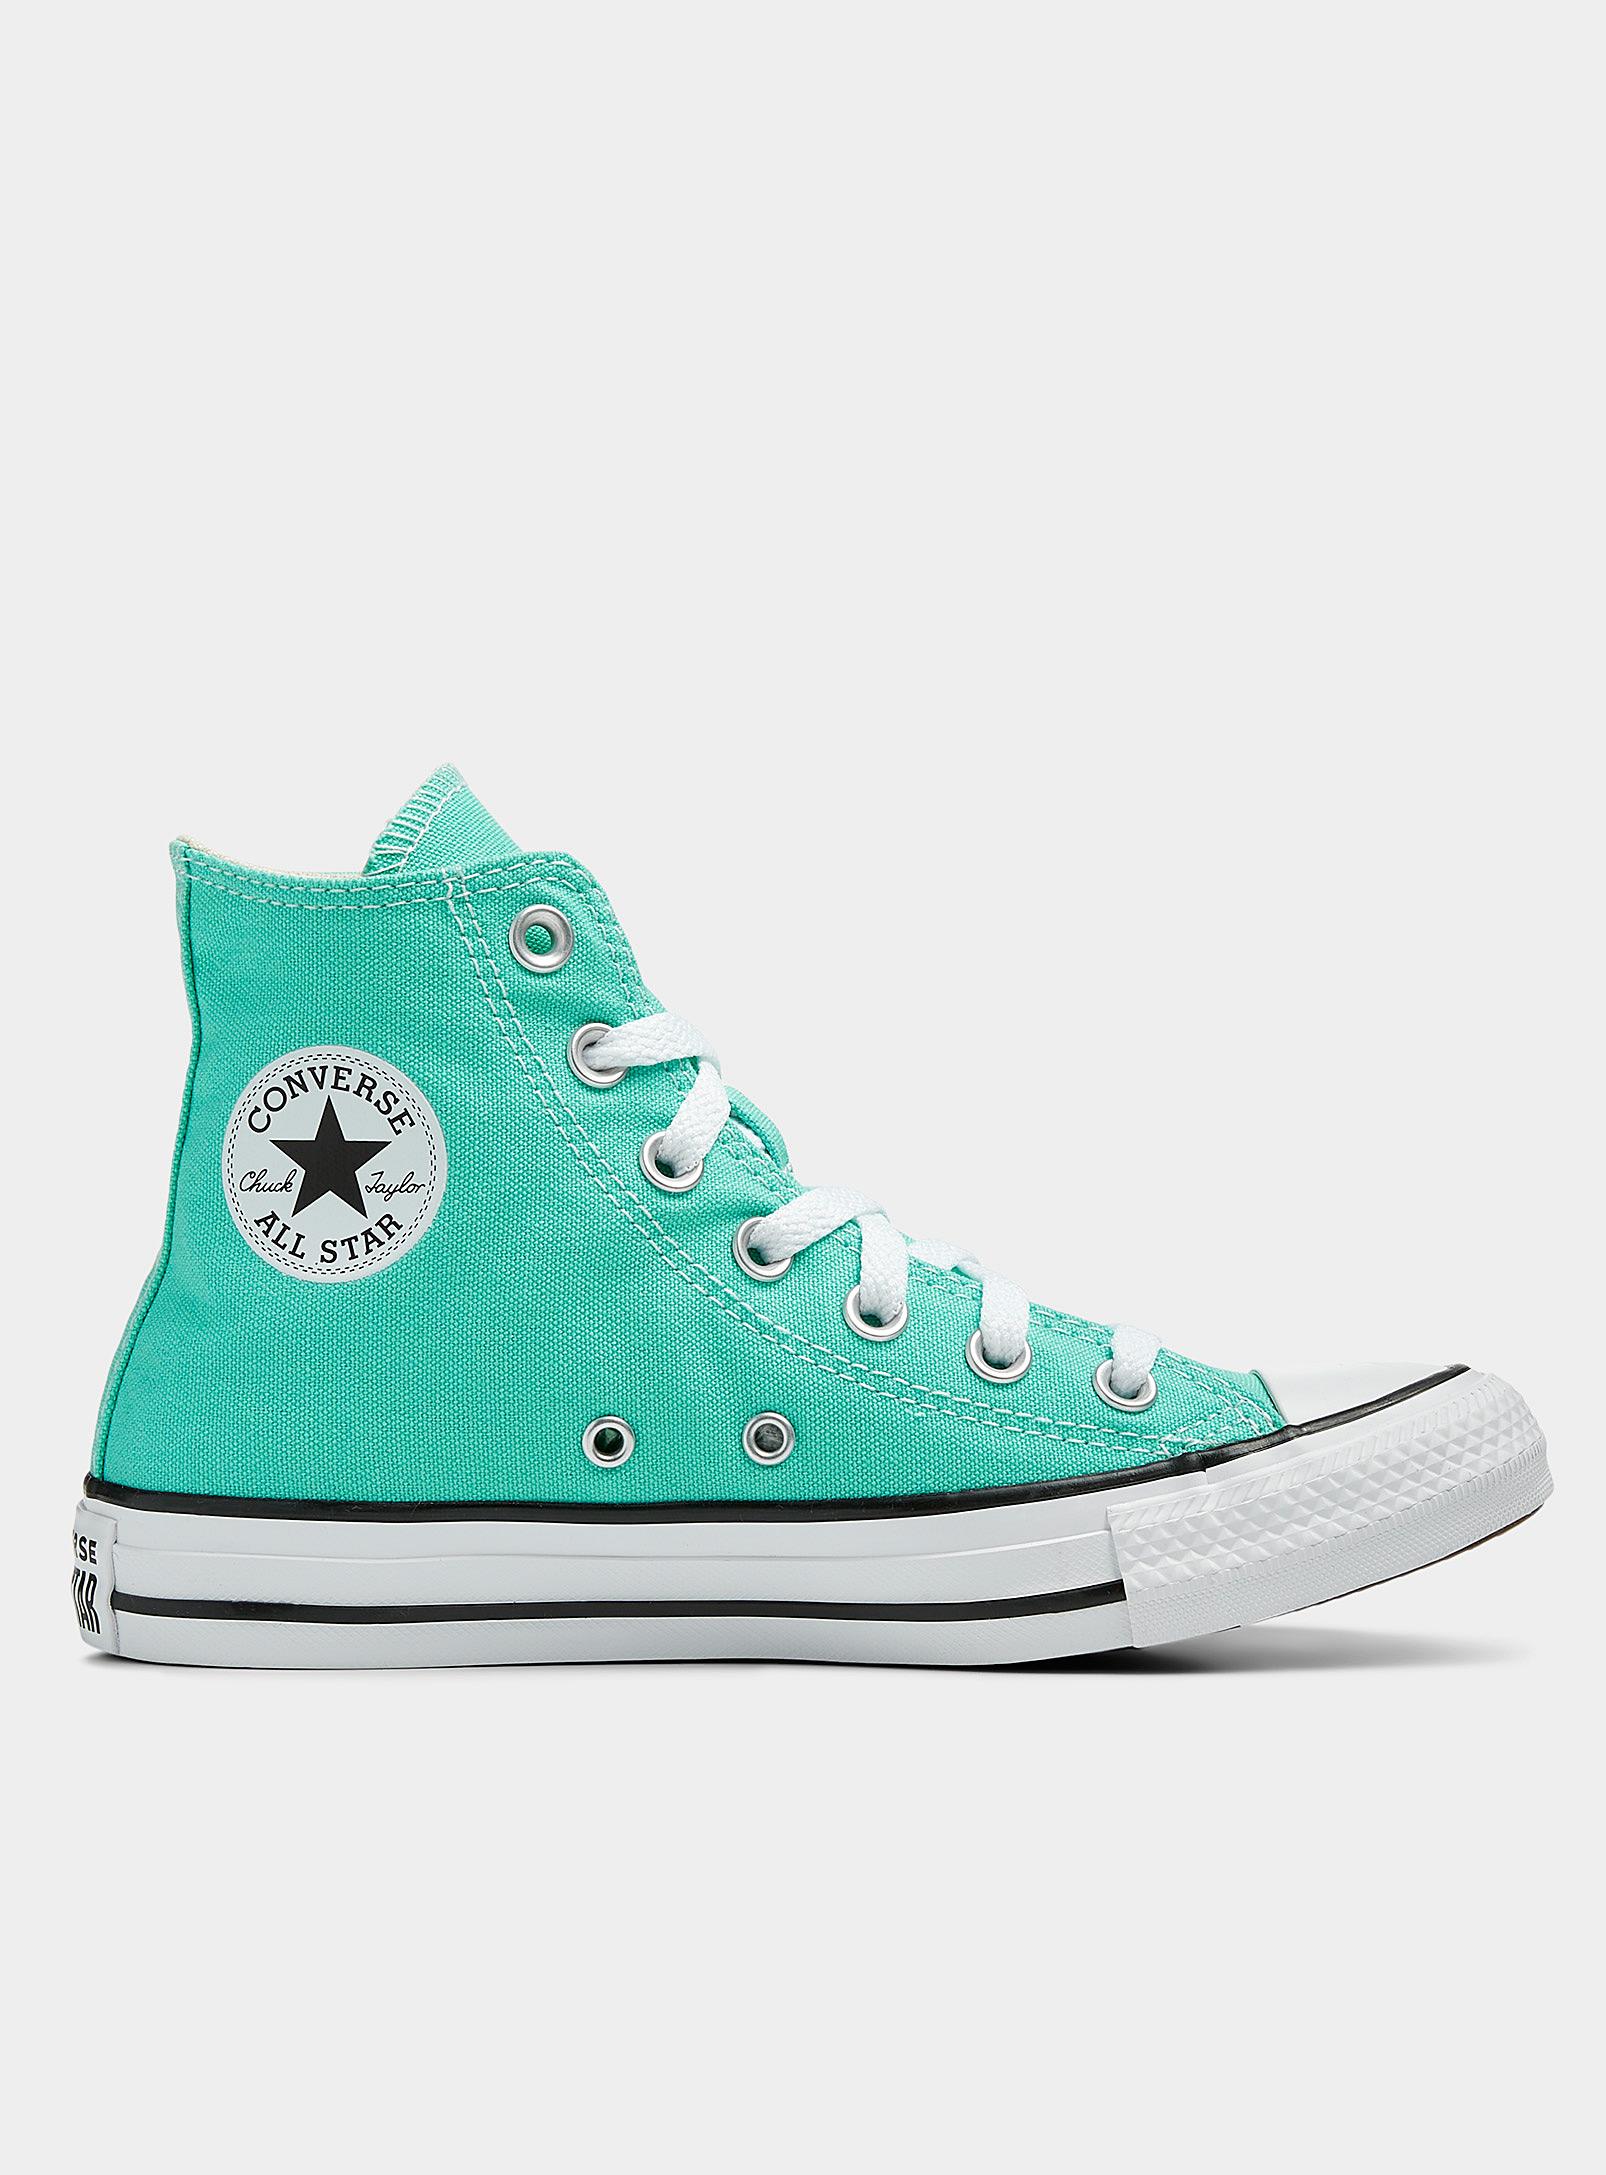 Converse Chuck Taylor All Star High Teal Sneakers in | Lyst